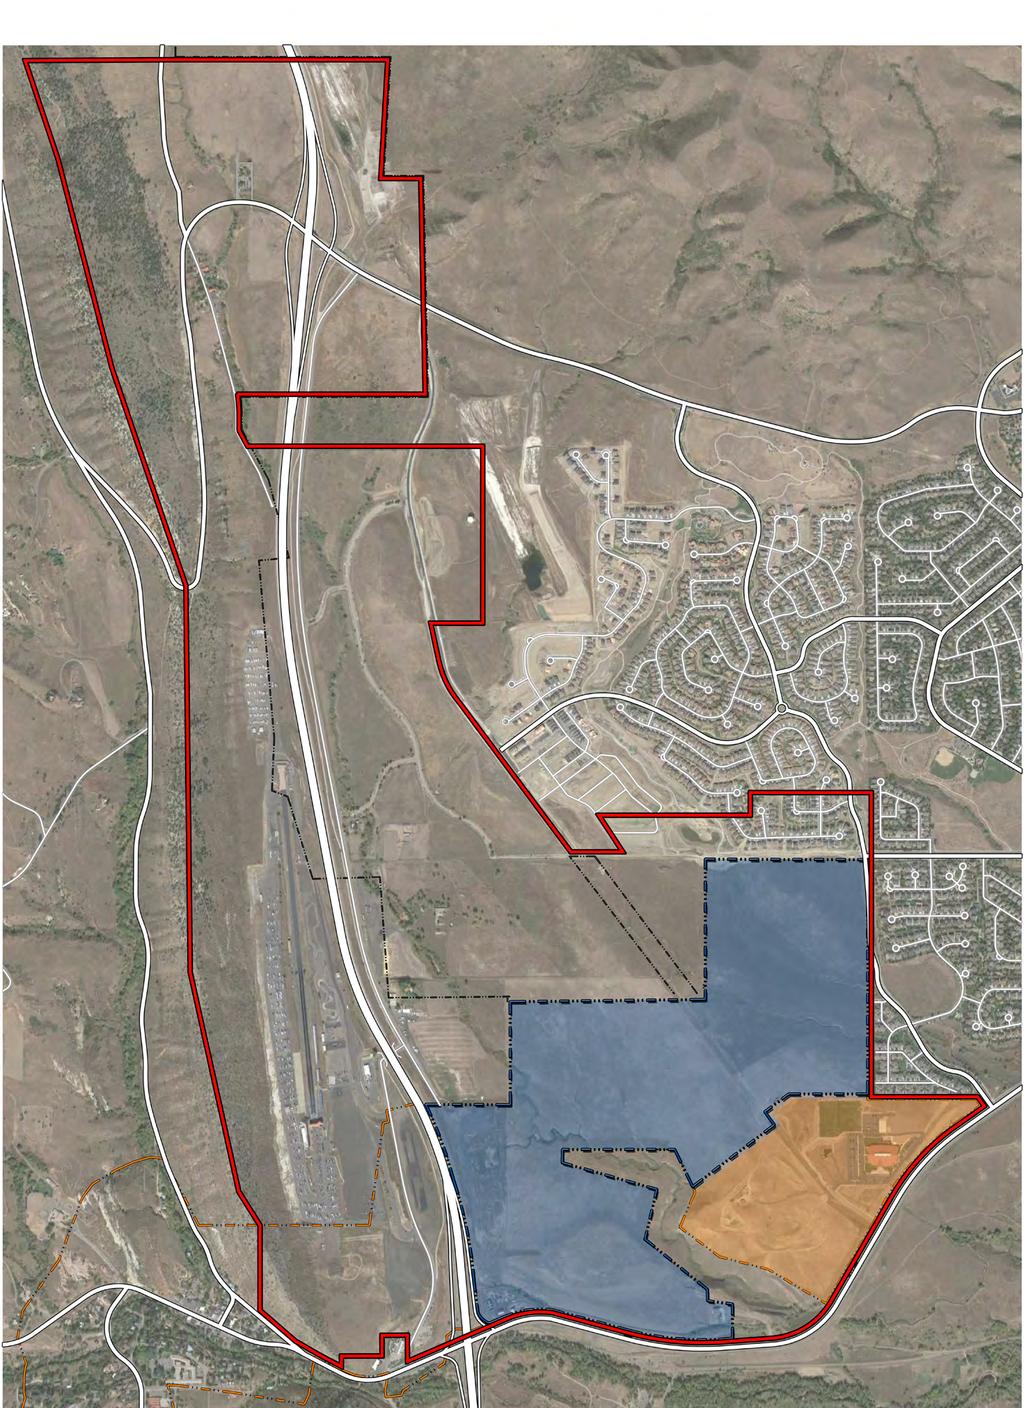 Plan Rooney Valley 32 A large portion of the Valley, known as the Red Rocks Centre planned development, contains 345 acres under single ownership, and currently lies within the boundaries of the Town